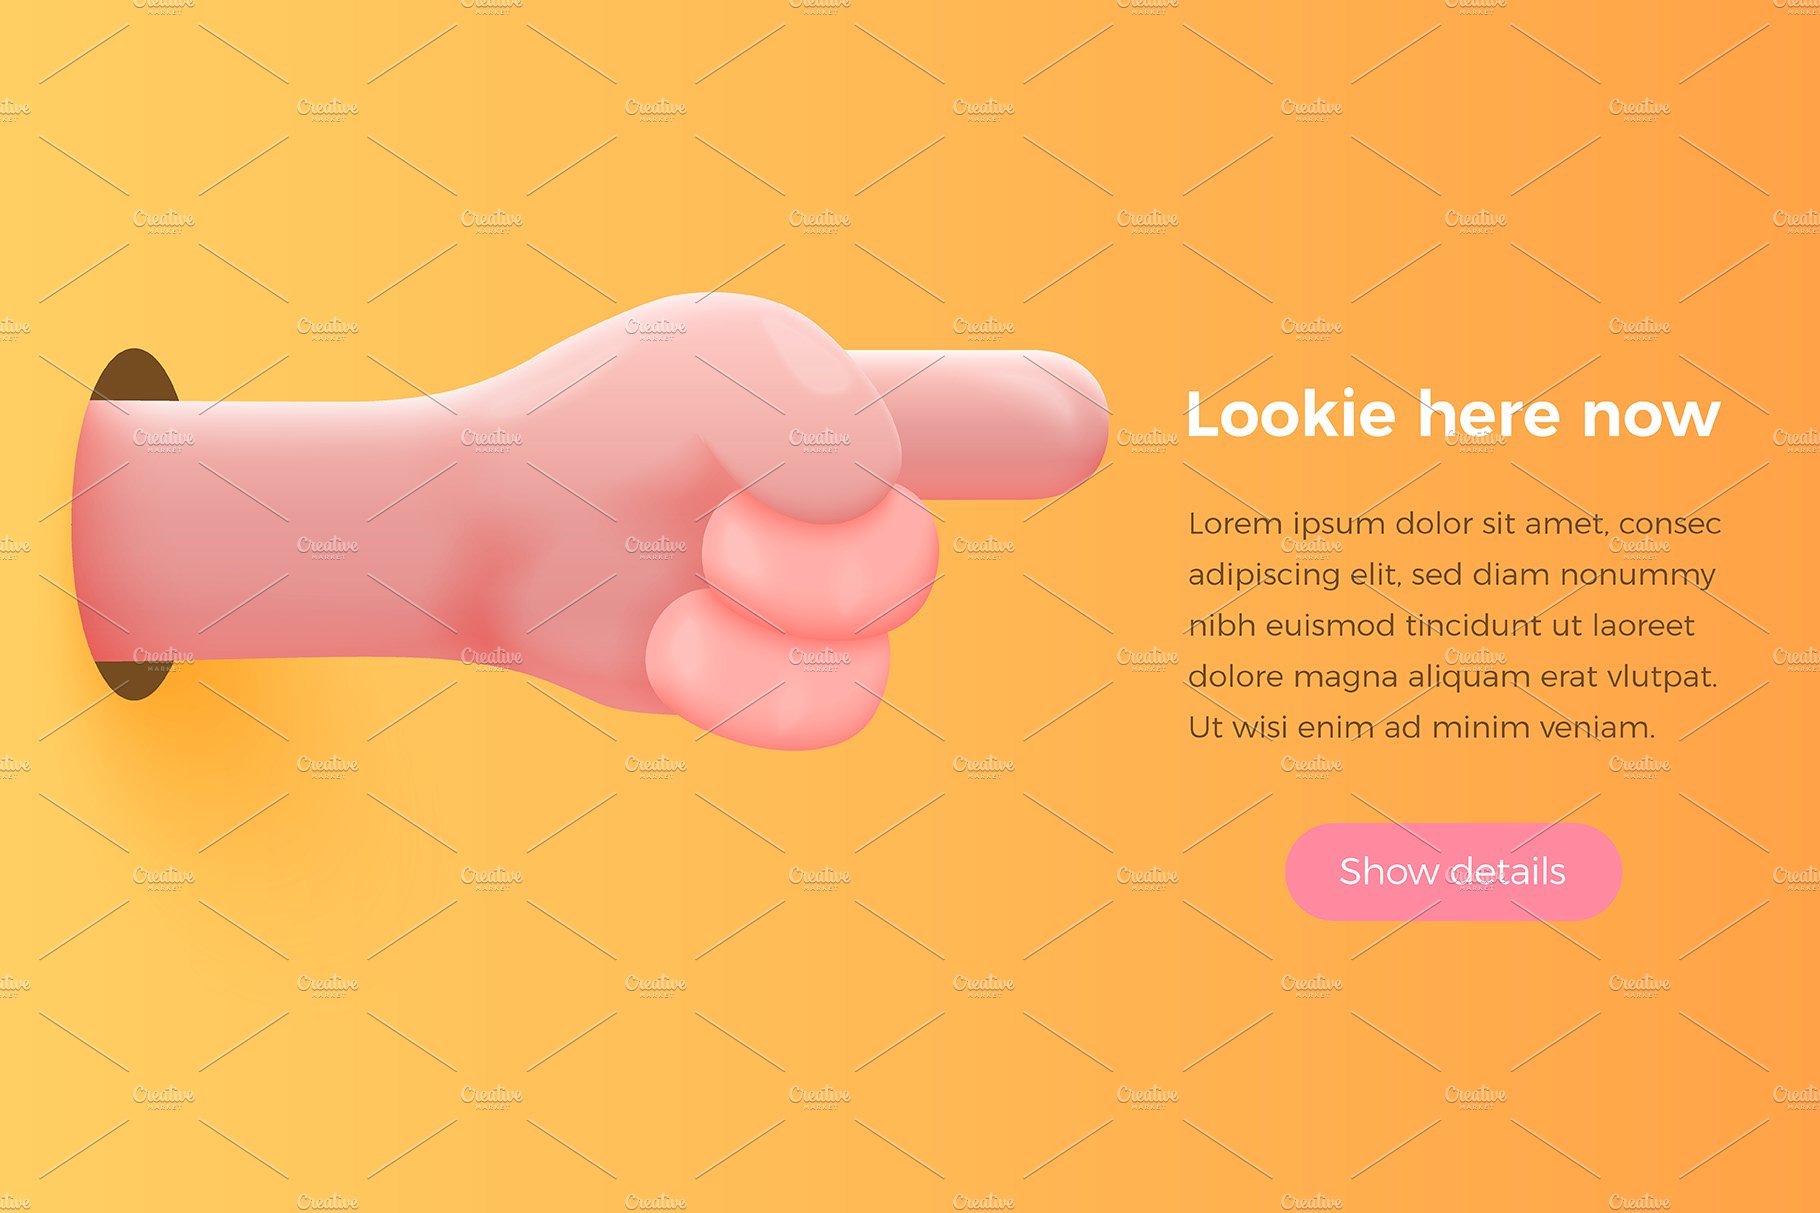 A pink hand holding a pink object on a yellow background.